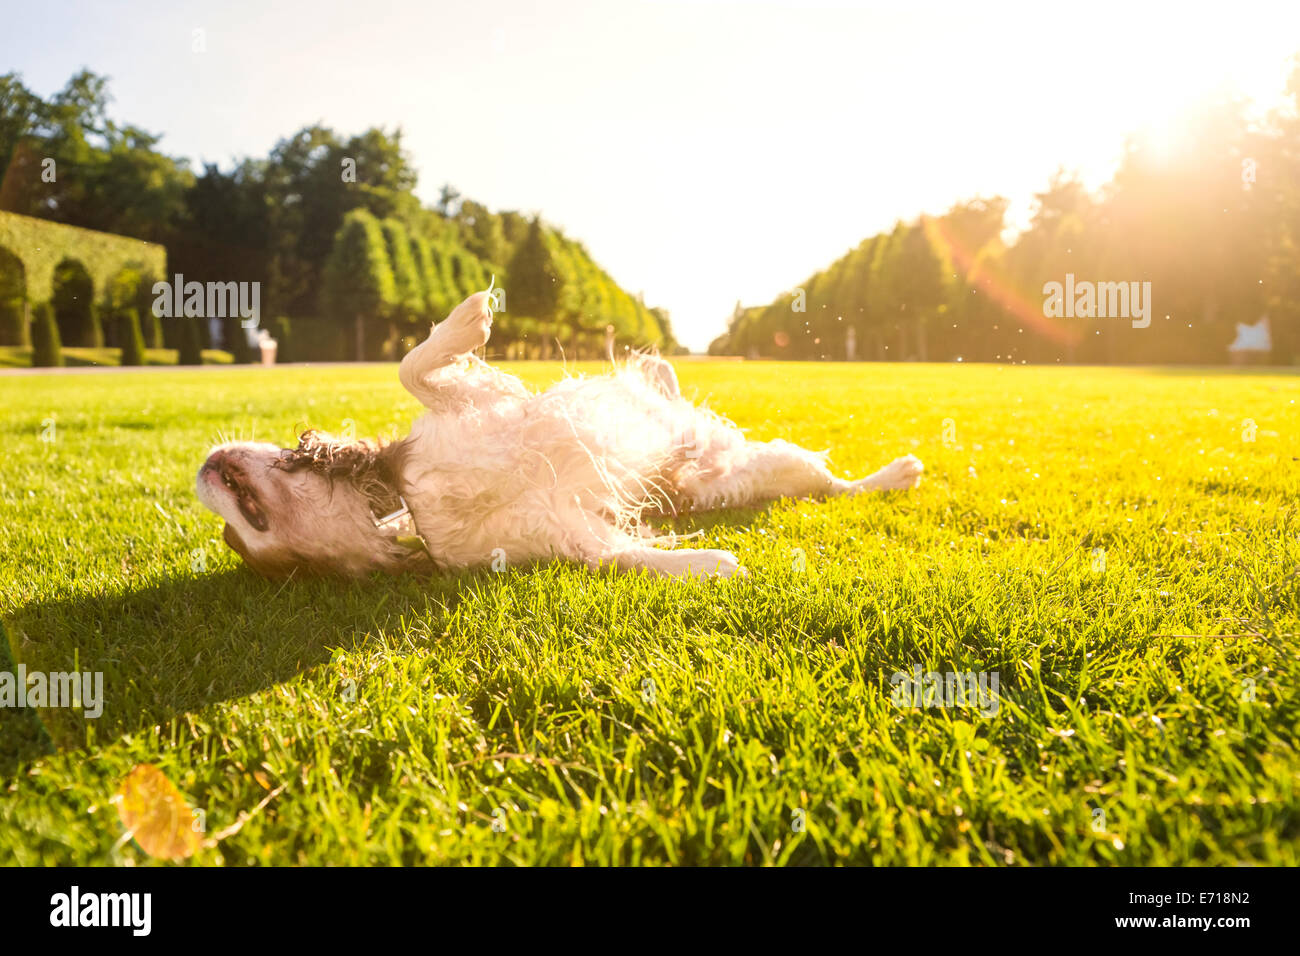 Dog, Canis lupus familiaris, rolling around on a meadow Stock Photo